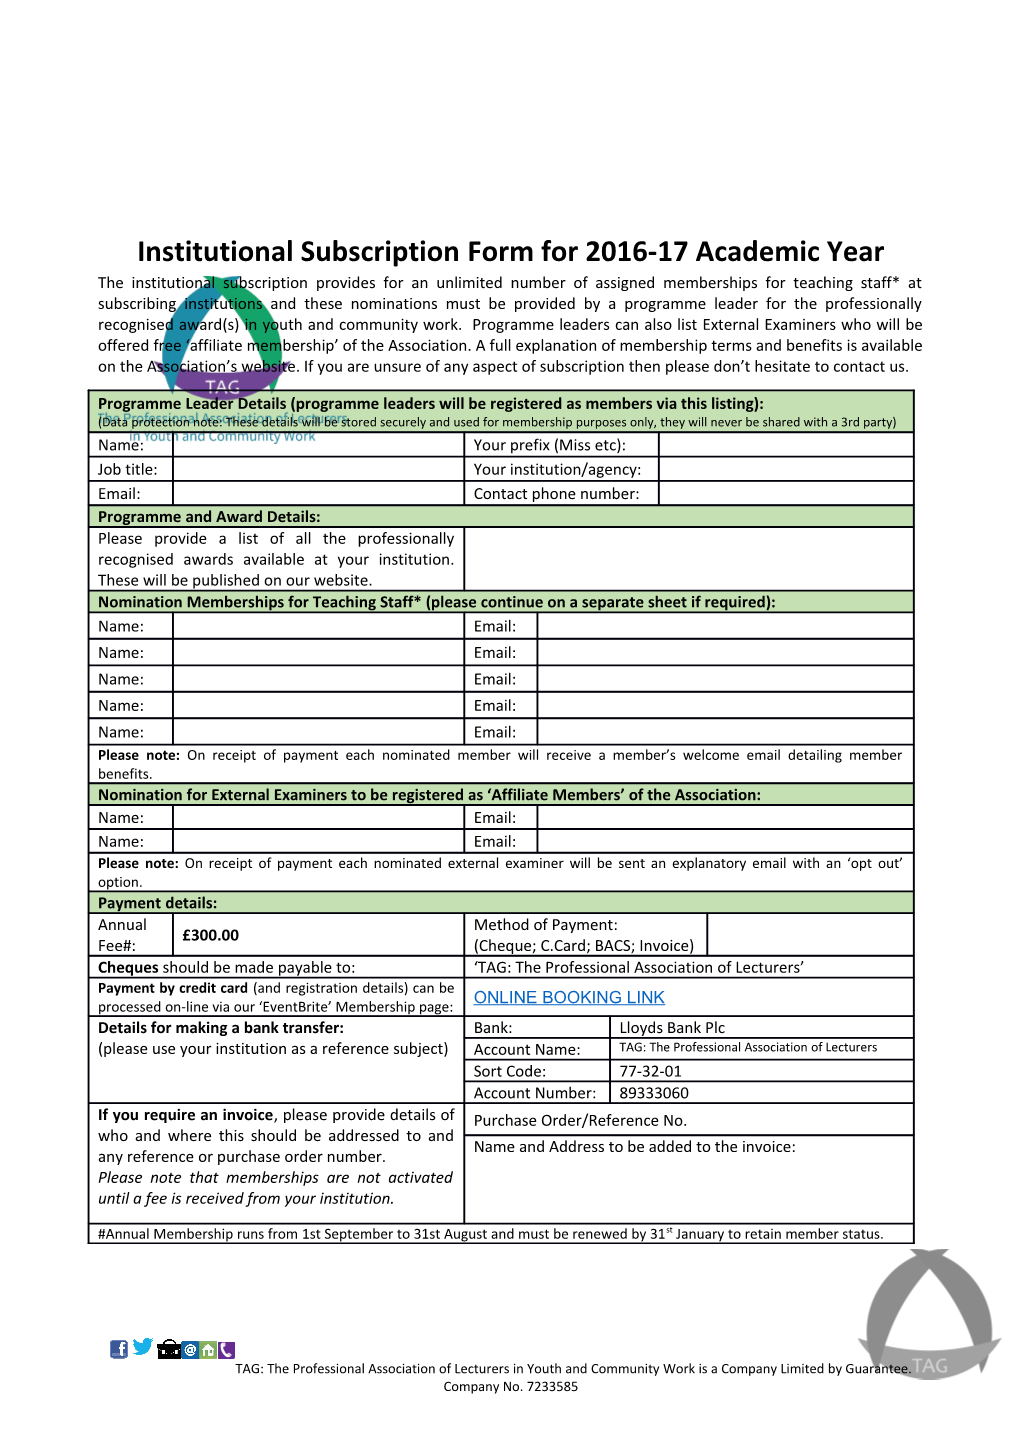 Institutional Subscription Formfor 2016-17 Academic Year